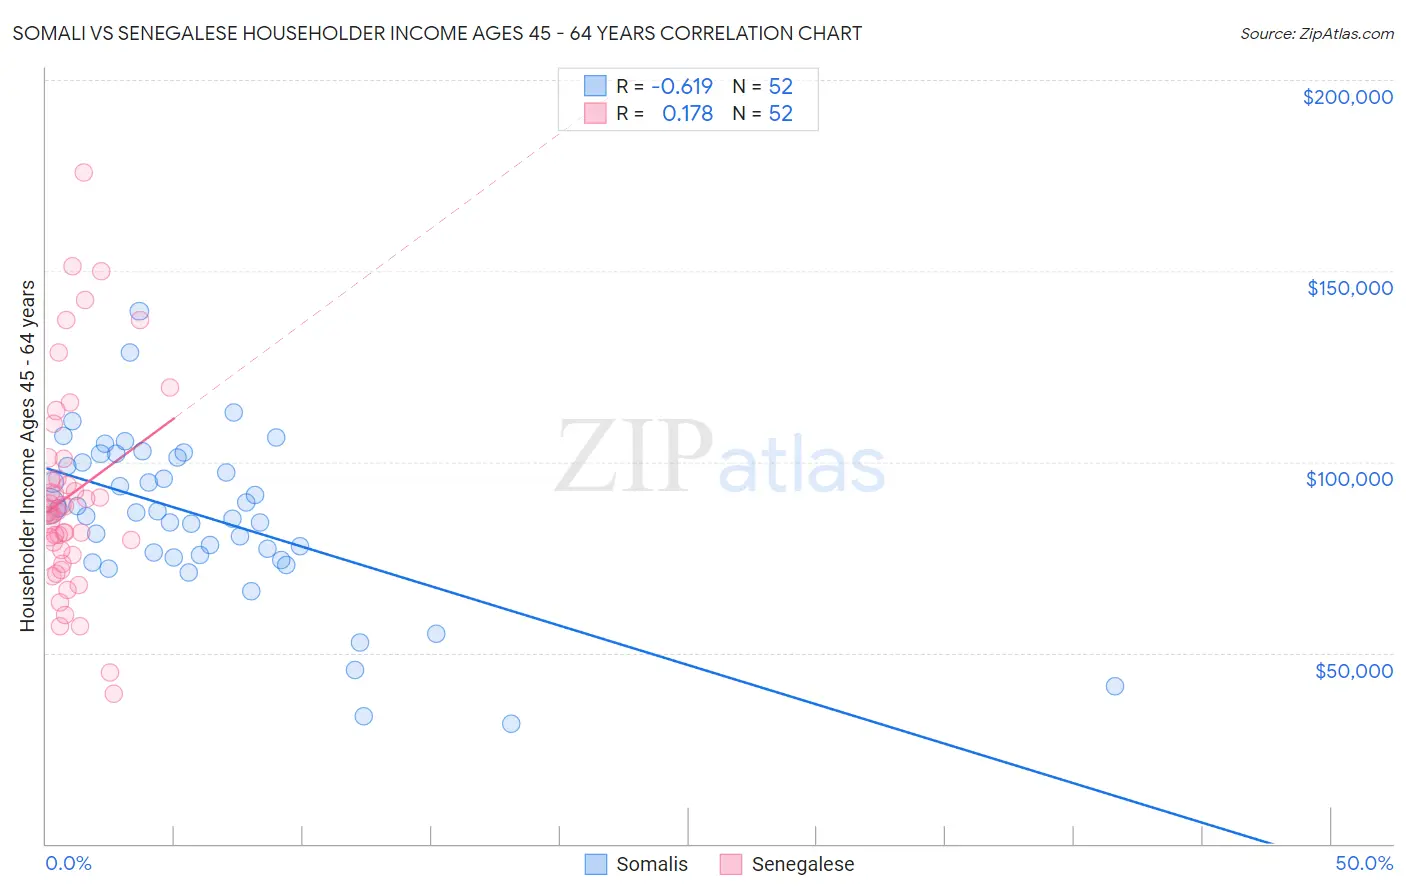 Somali vs Senegalese Householder Income Ages 45 - 64 years